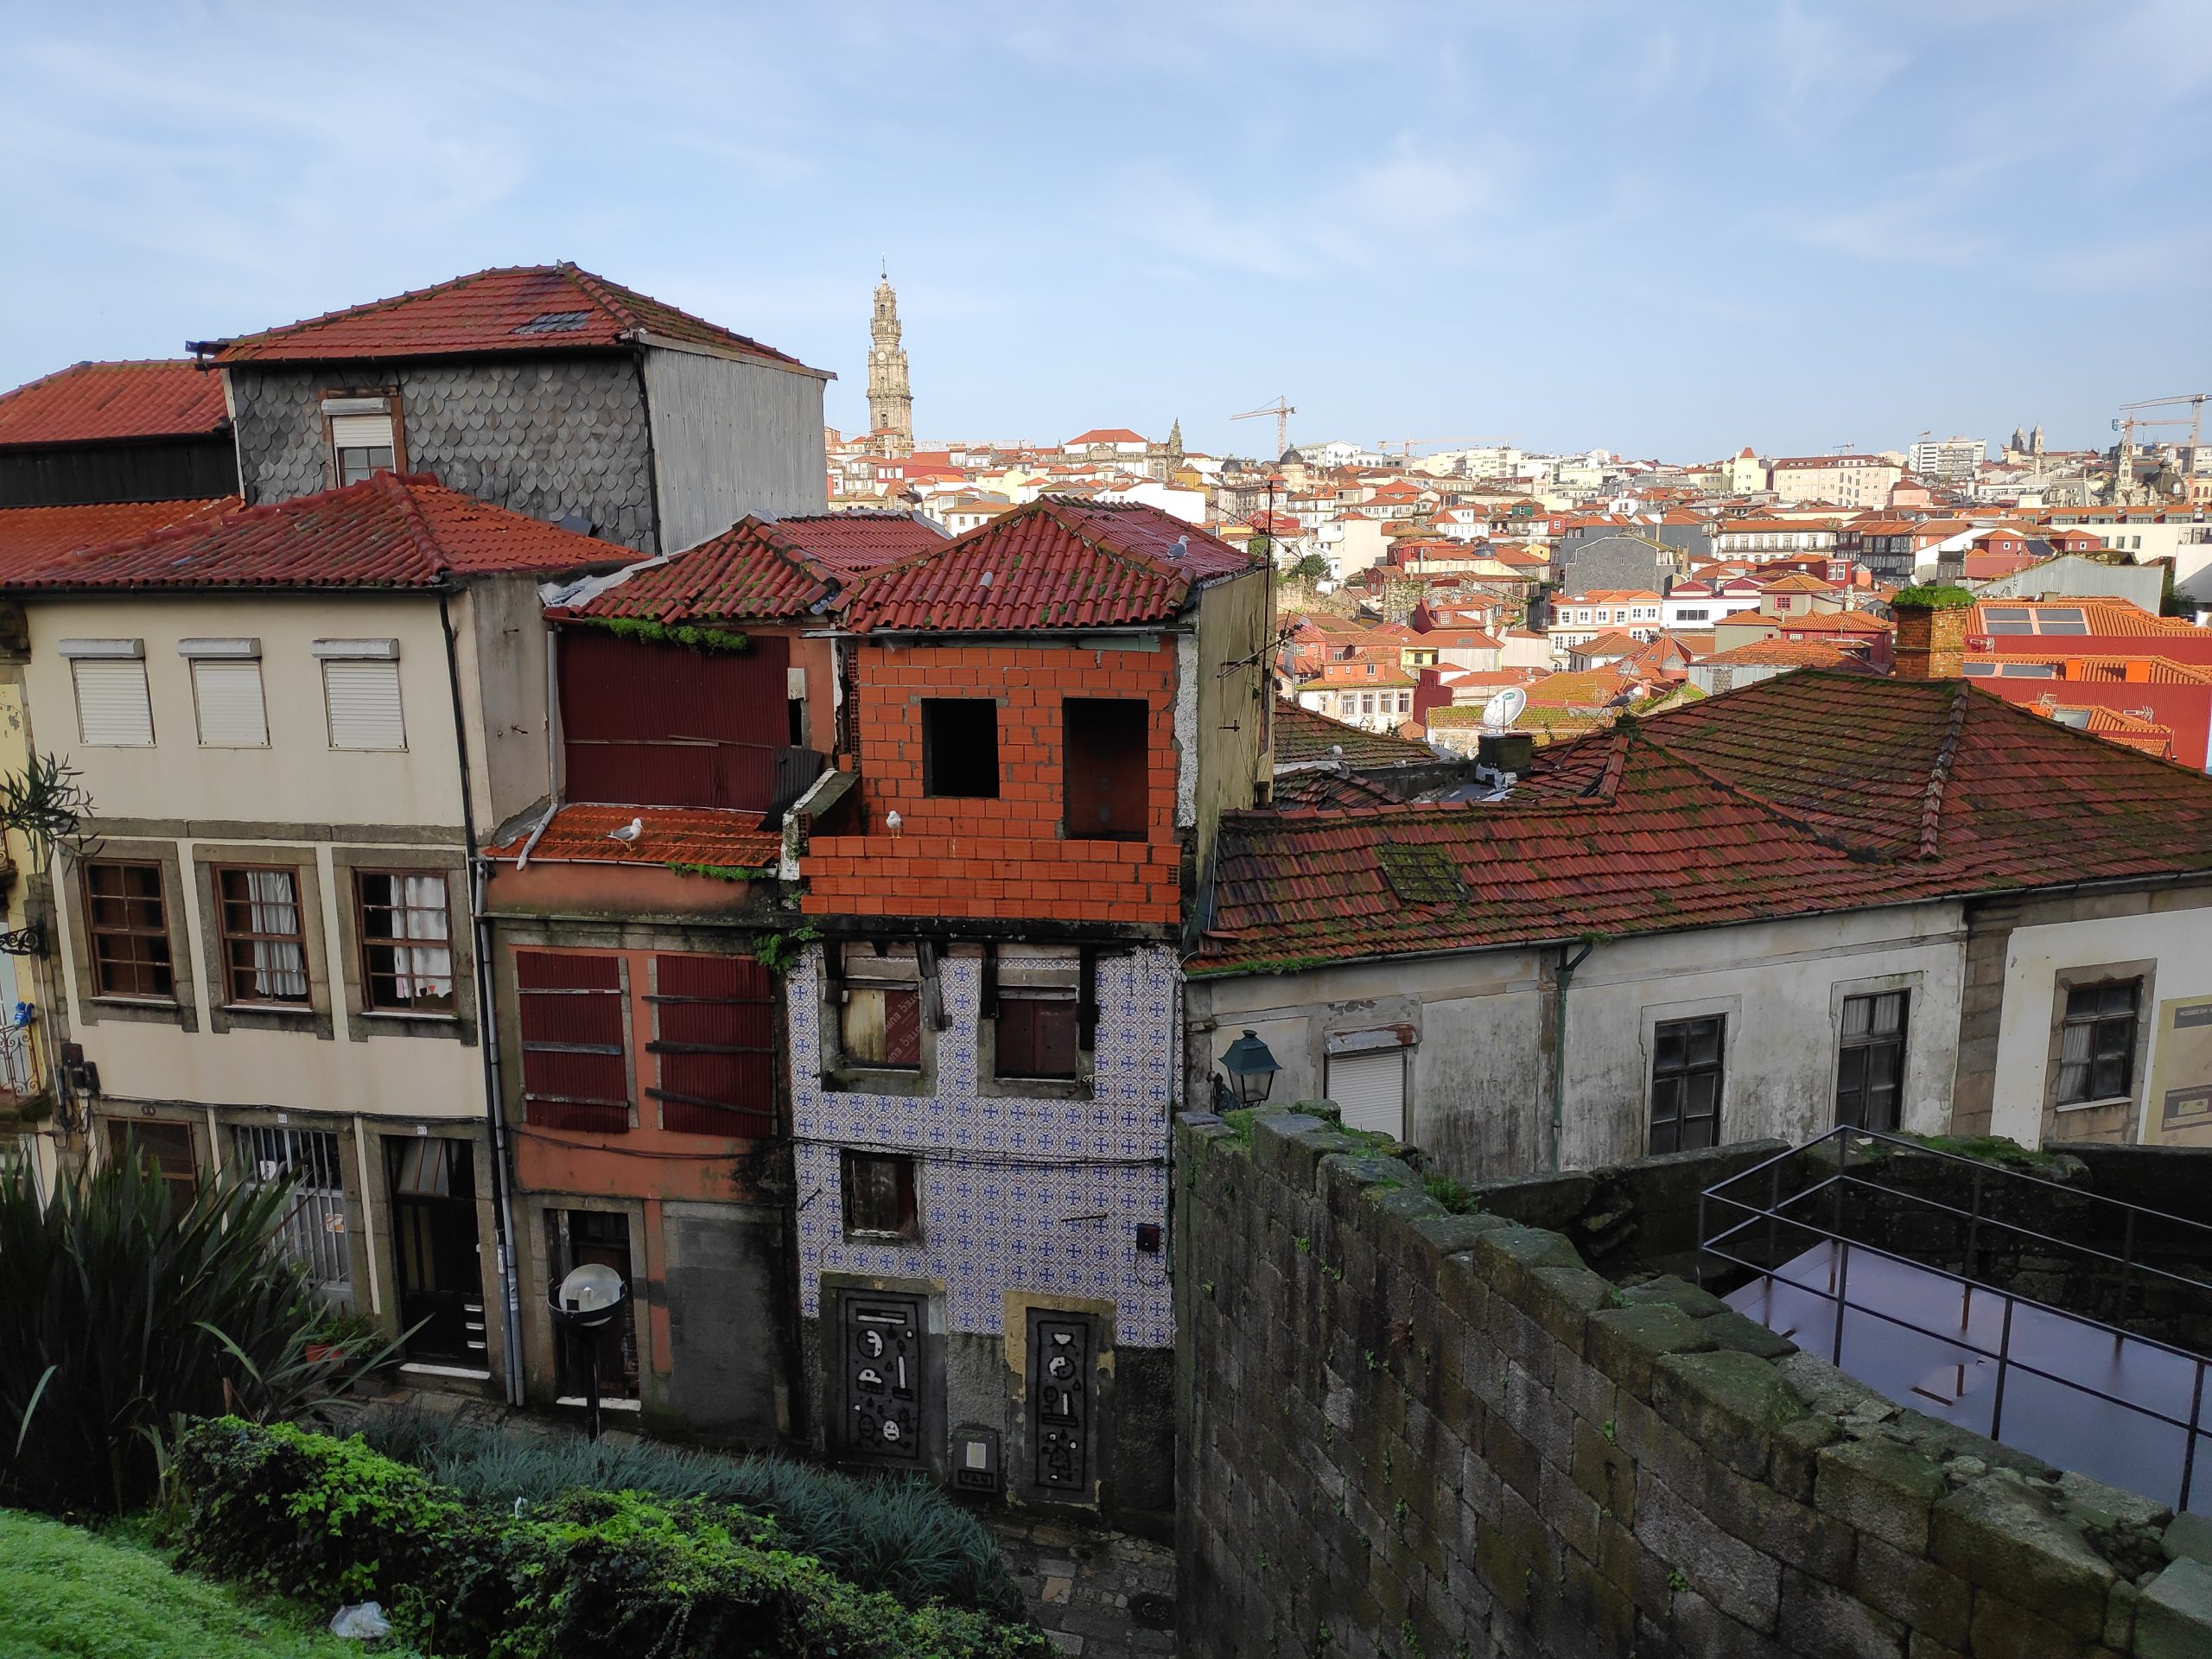 Interesting building desings in Porto. Not quite sure, how safe it is at the top.